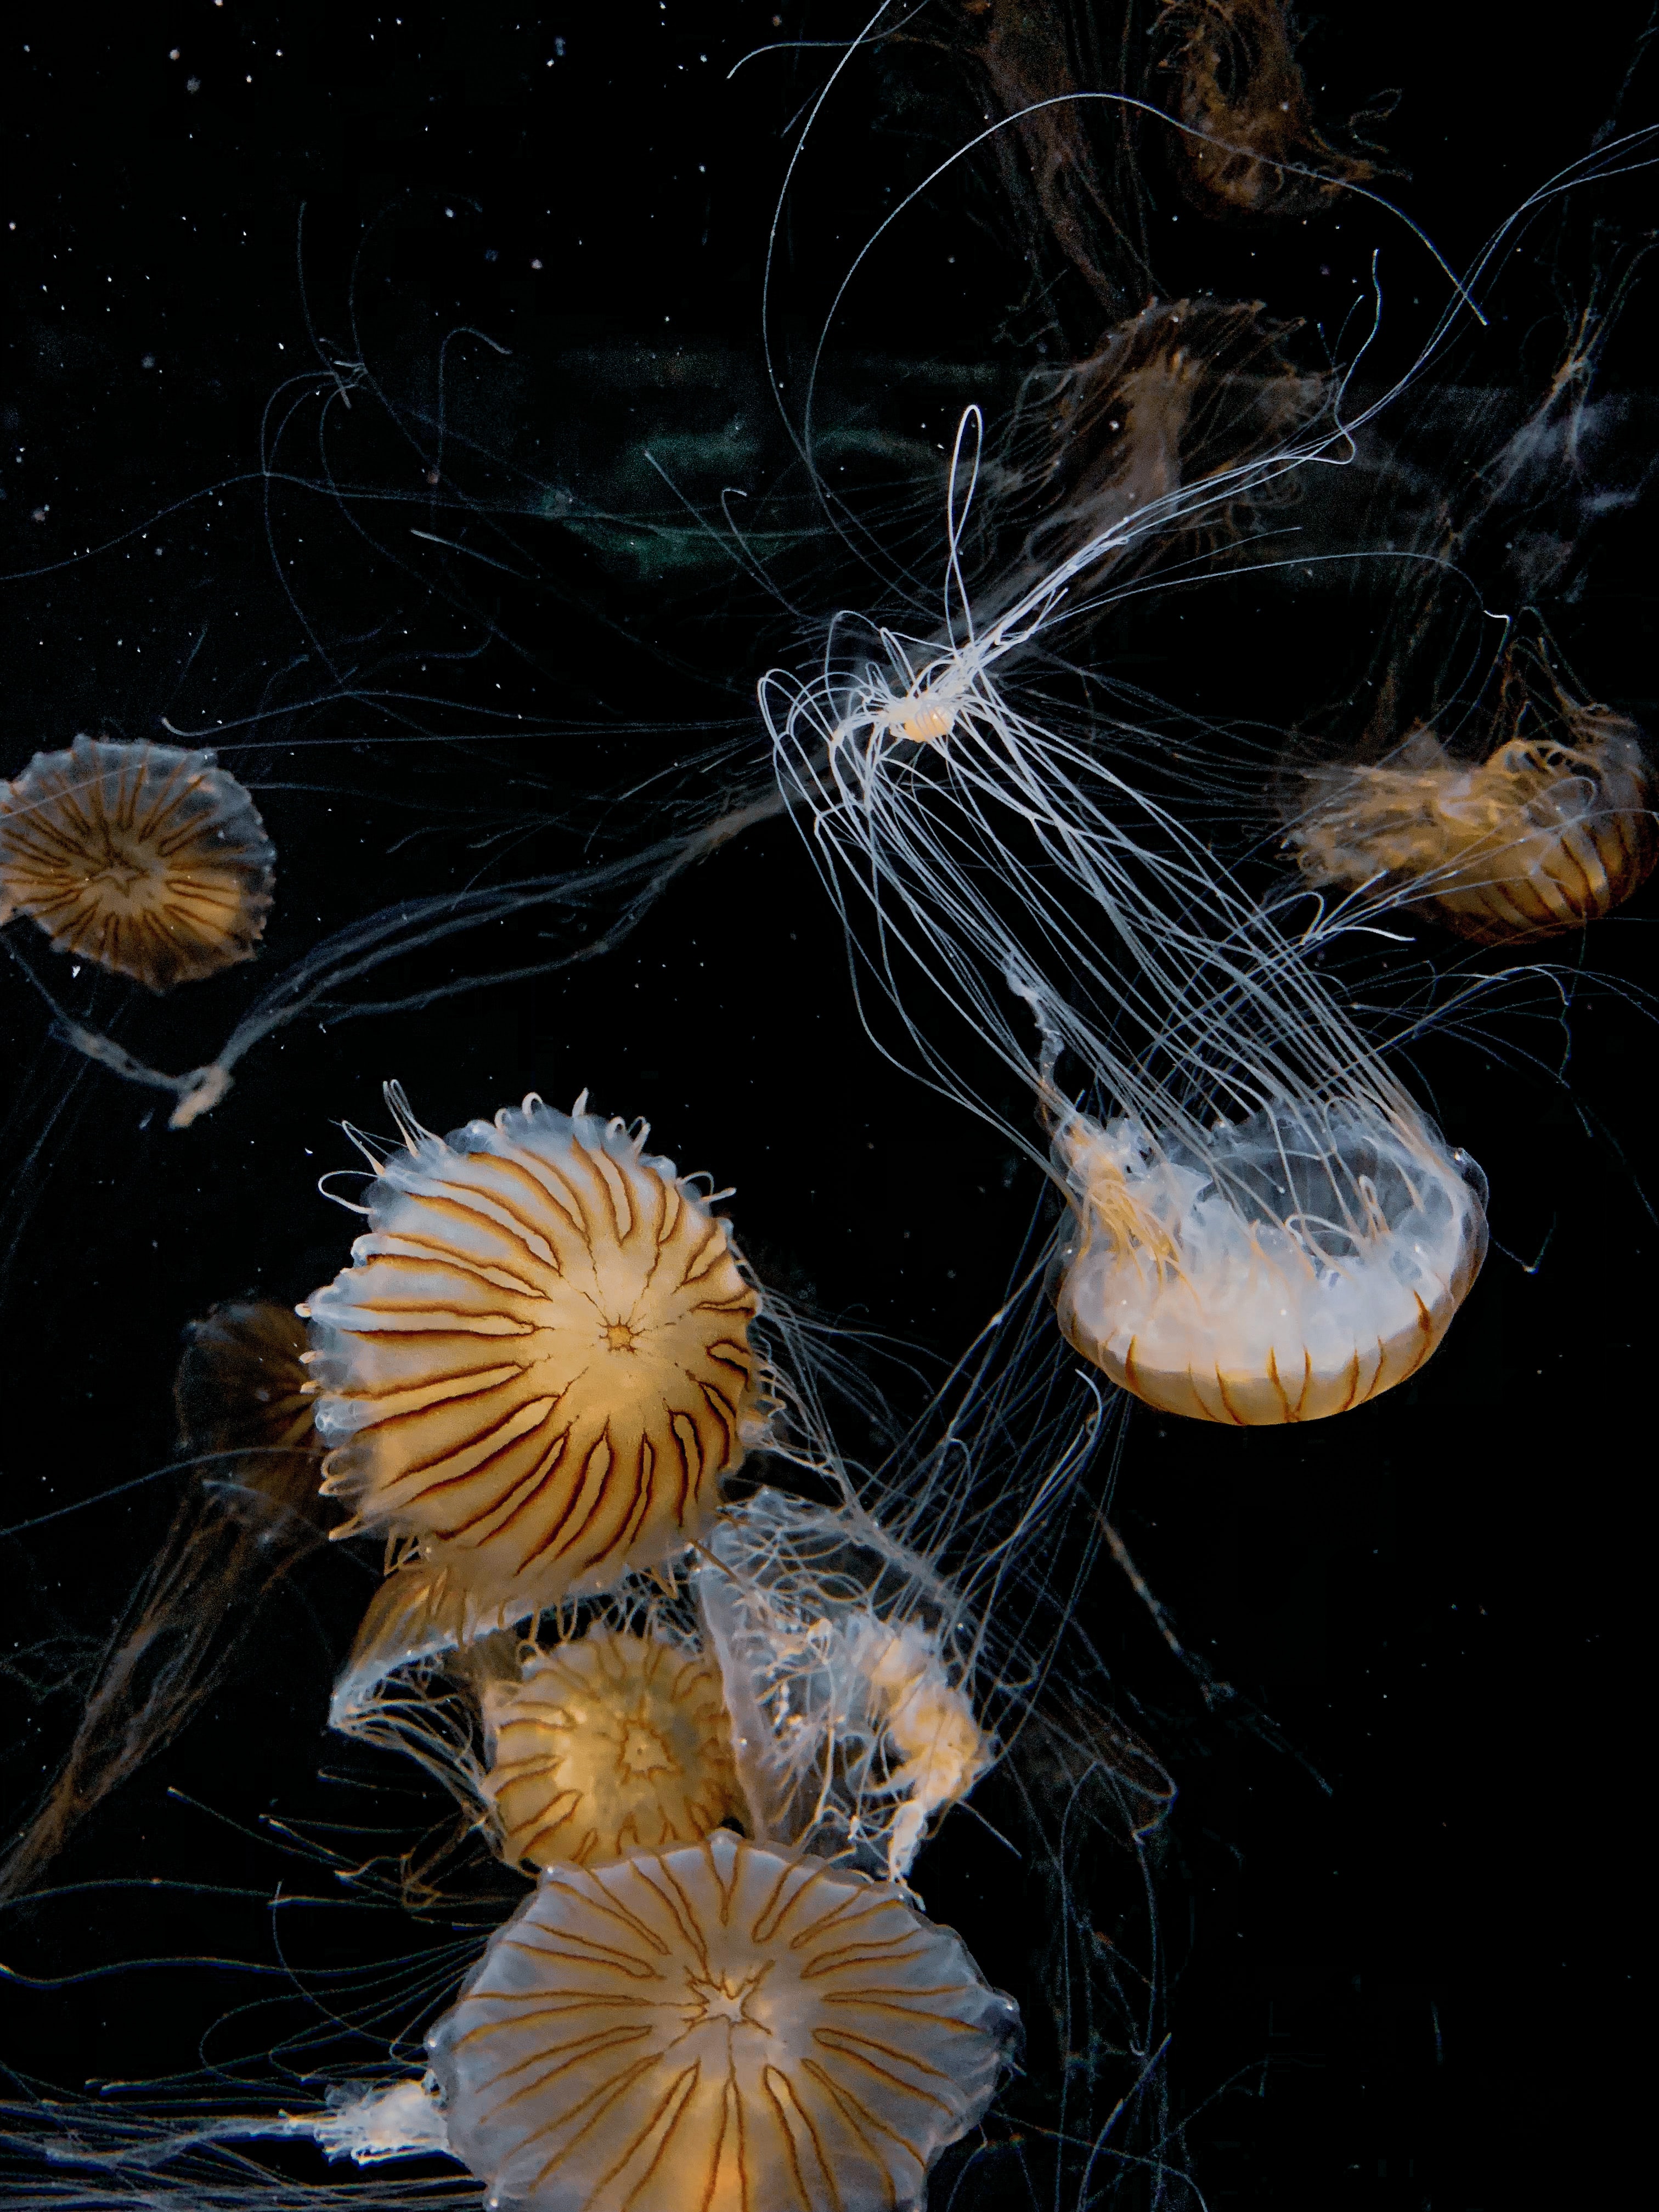 wallpapers animals, jellyfish, black, tentacle, handsomely, it's beautiful